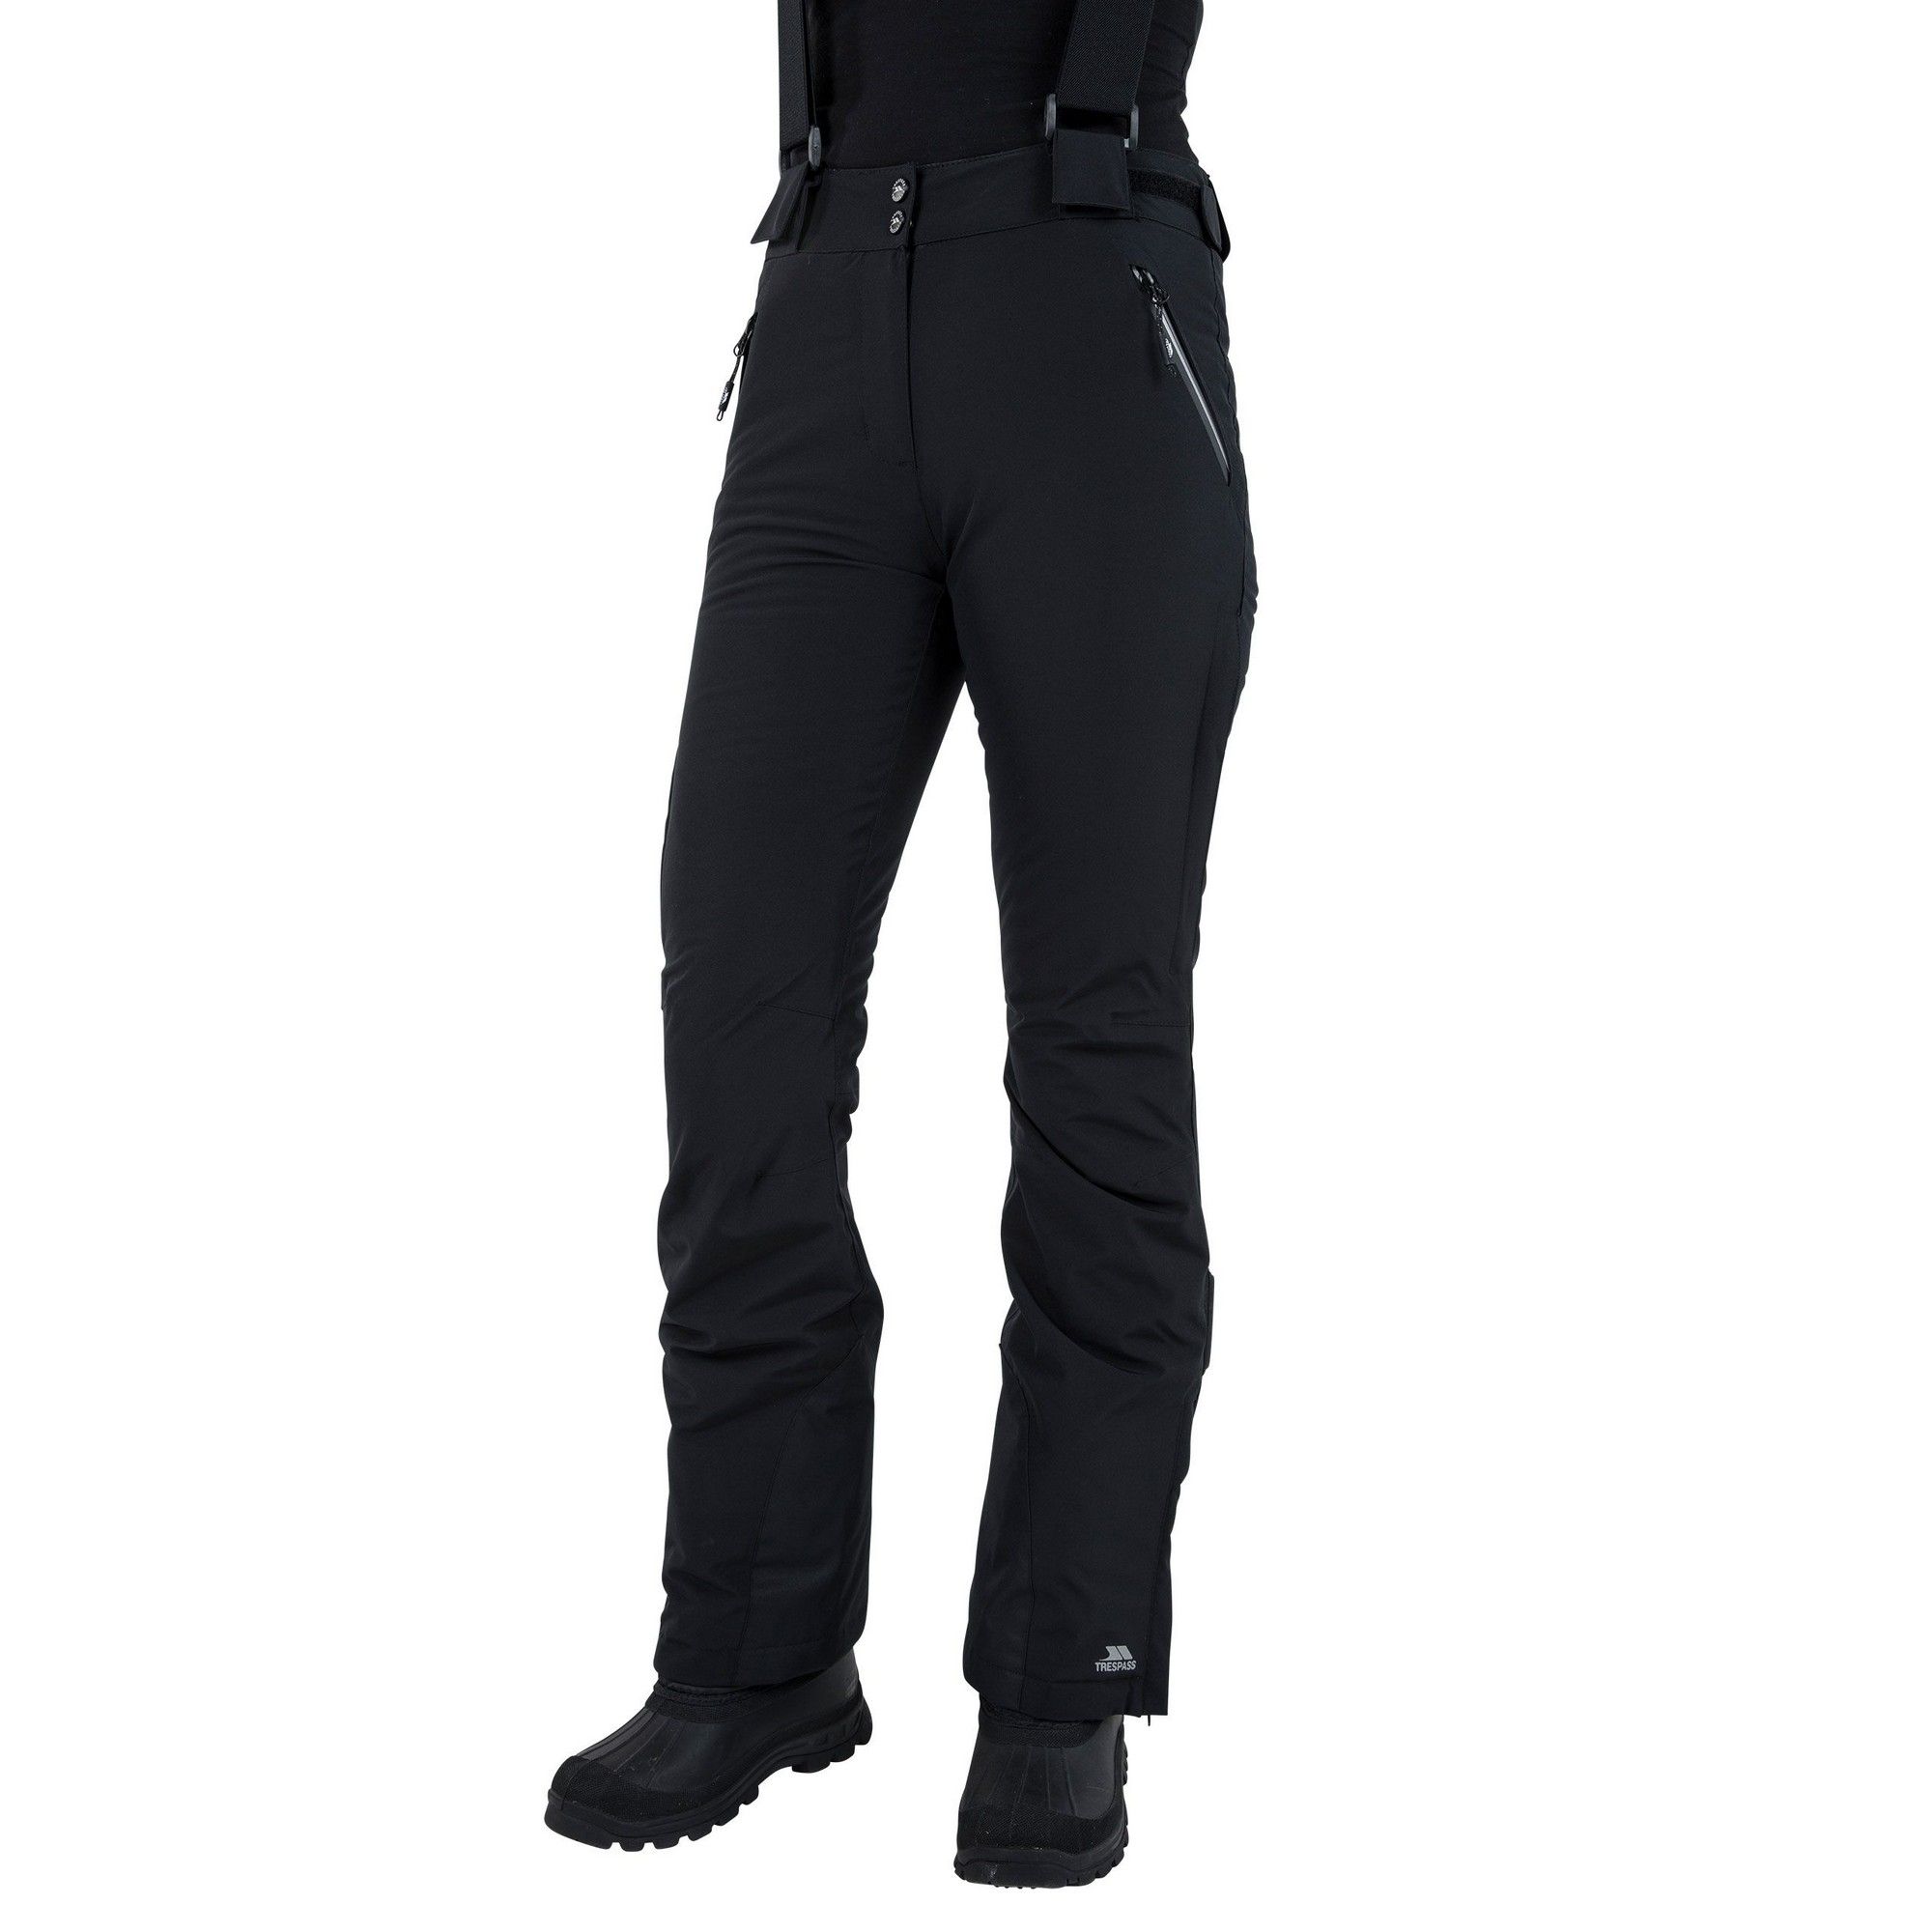 Lightly padded. Microfleece at seat and knees. Knitted. Shell - 92% polyester, 8% elastane. Lining - 100% polyester. 3 water repellent zip pockets. Detachable braces. Side leg ventilation zips. Side ankle zip with facing. Ankle gaiters. Slim fit.